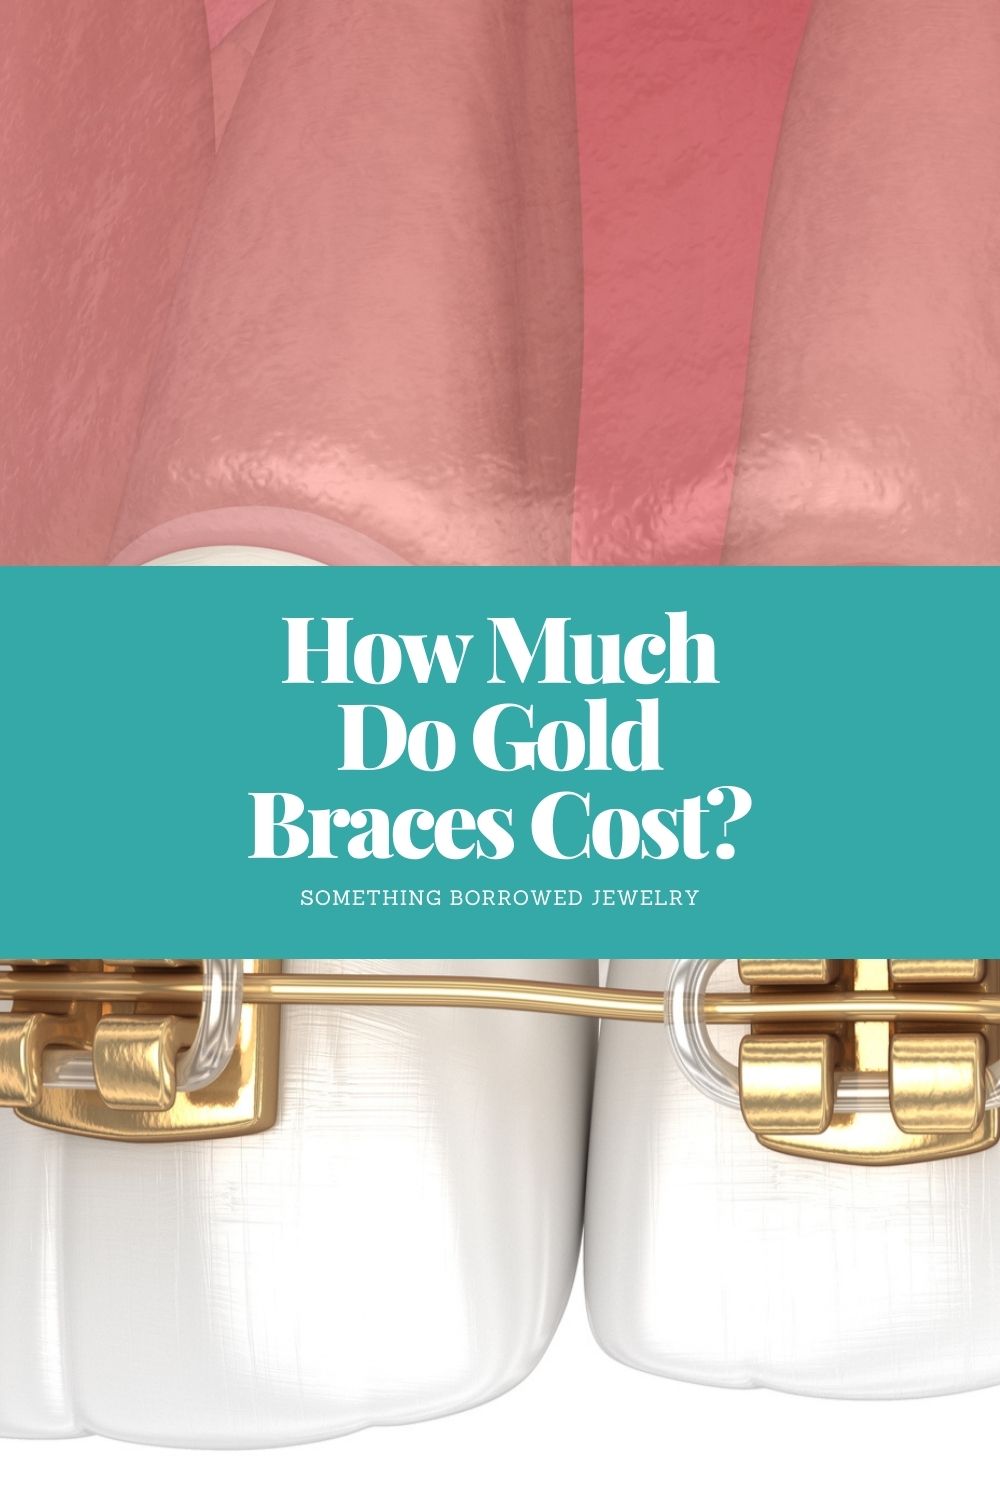 How Much Do Gold Braces Cost pin 2